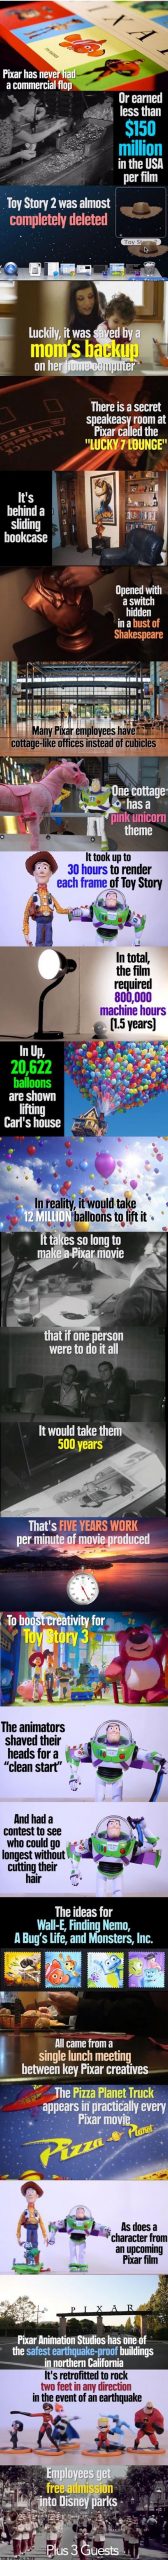 Facts about Pixar